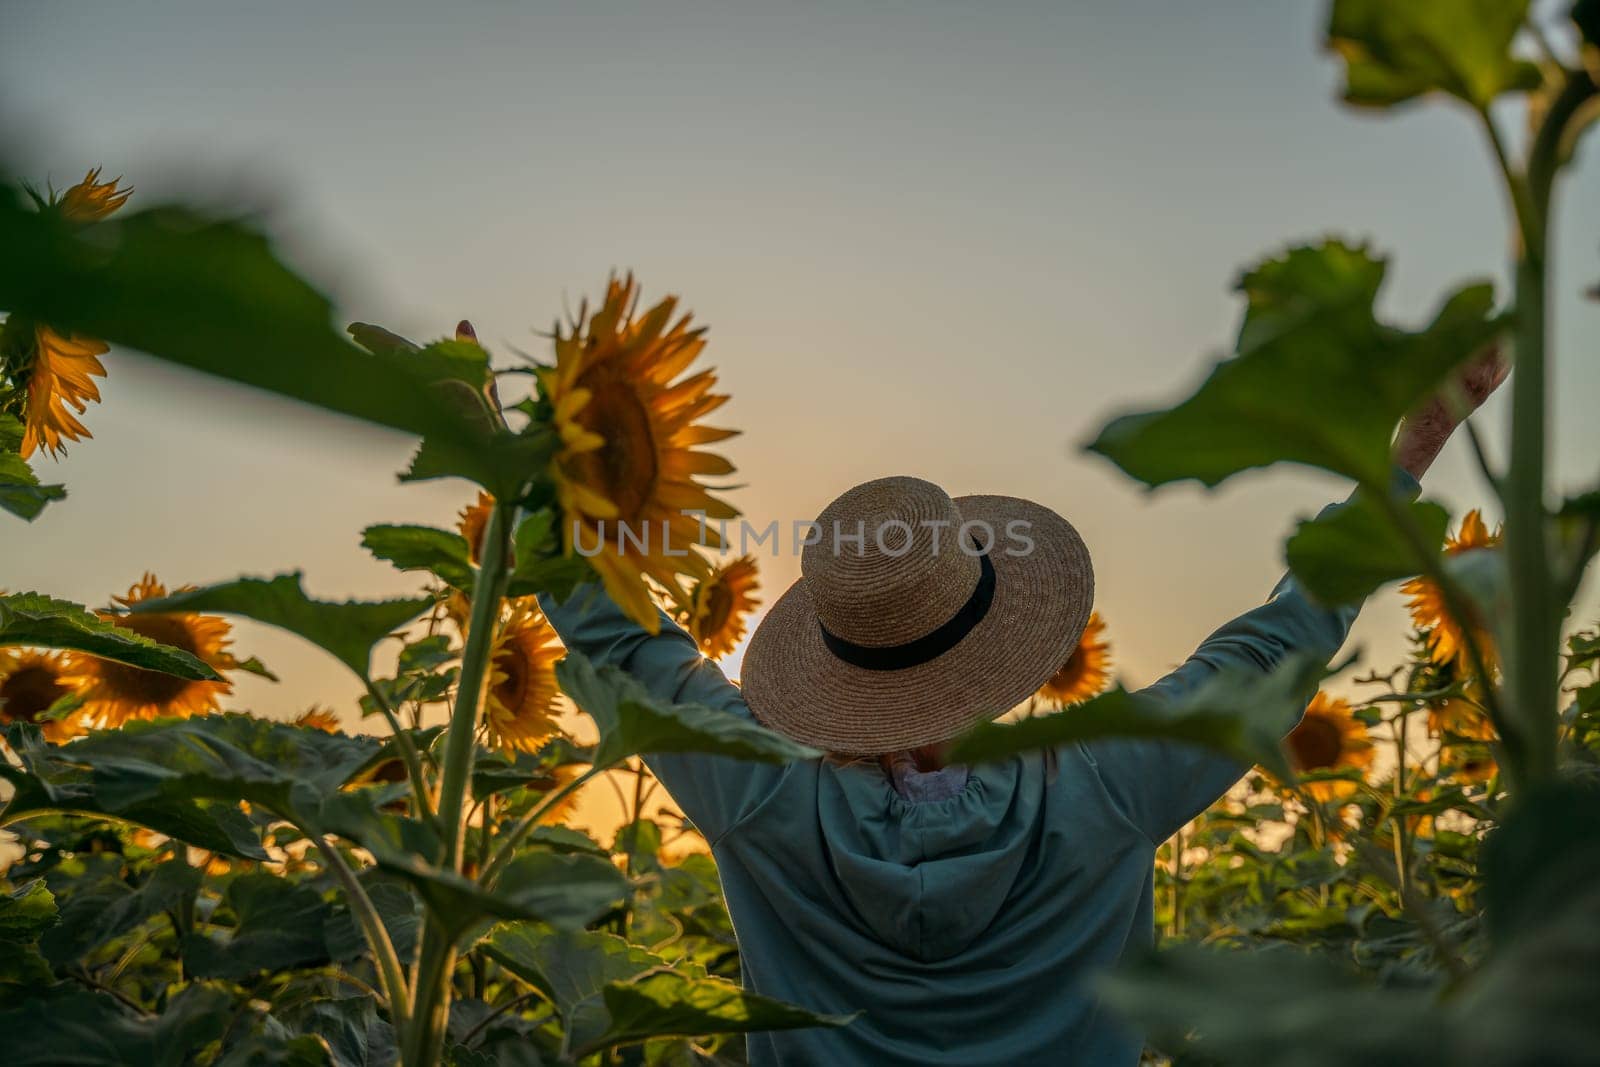 A woman in a straw hat is holding a sunflower. Concept of warmth and happiness, as the woman is surrounded by the bright and cheerful flower